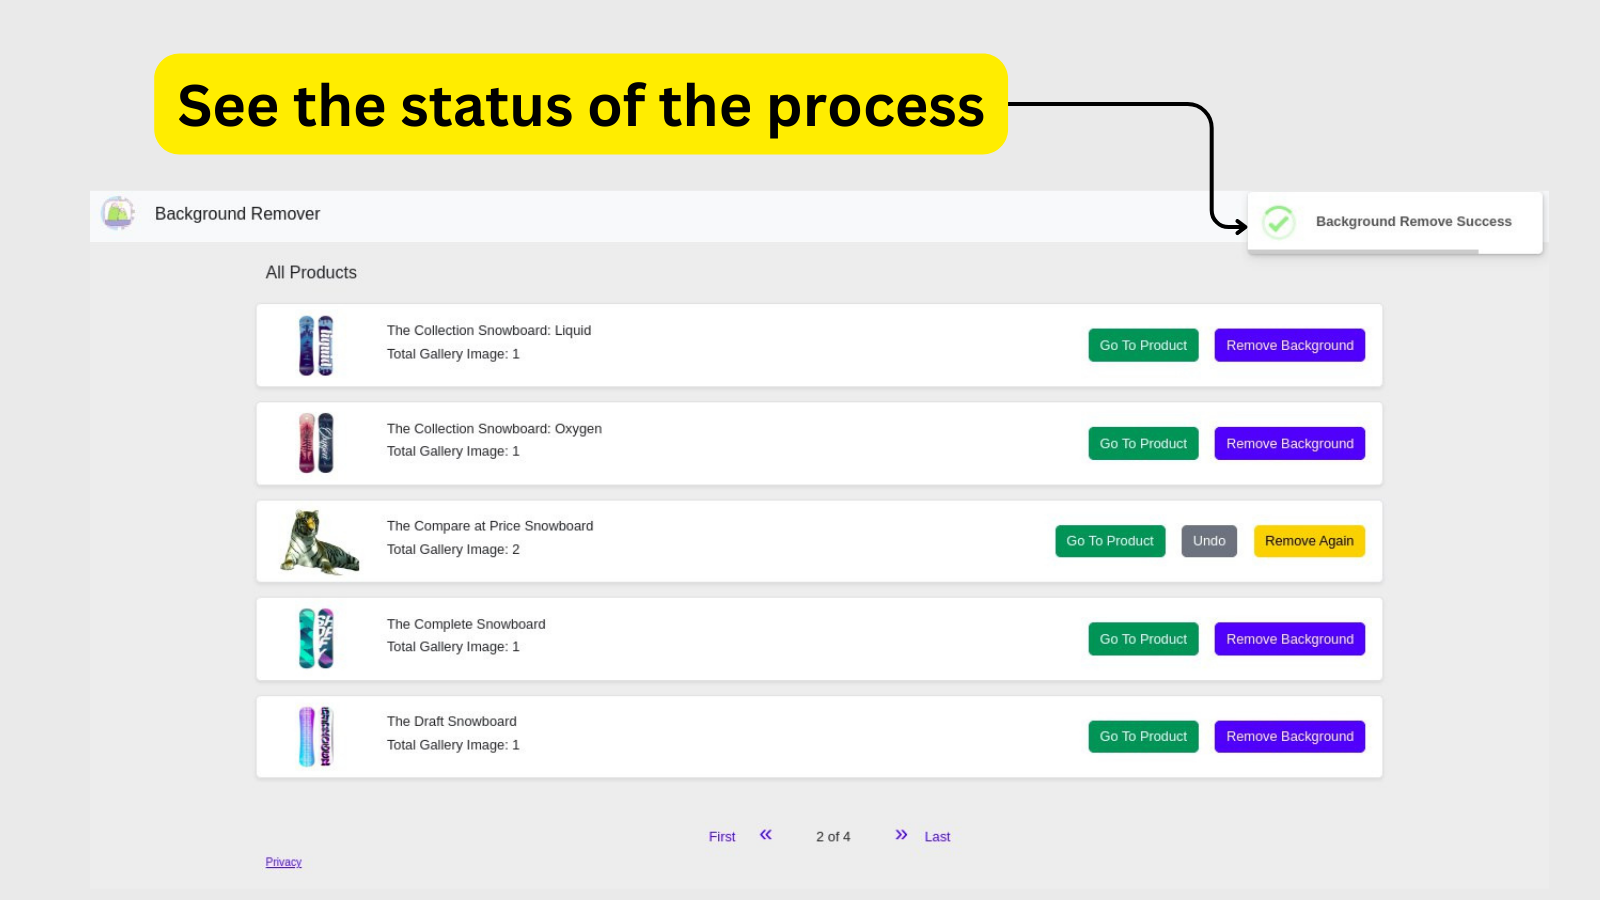 See the status of the process